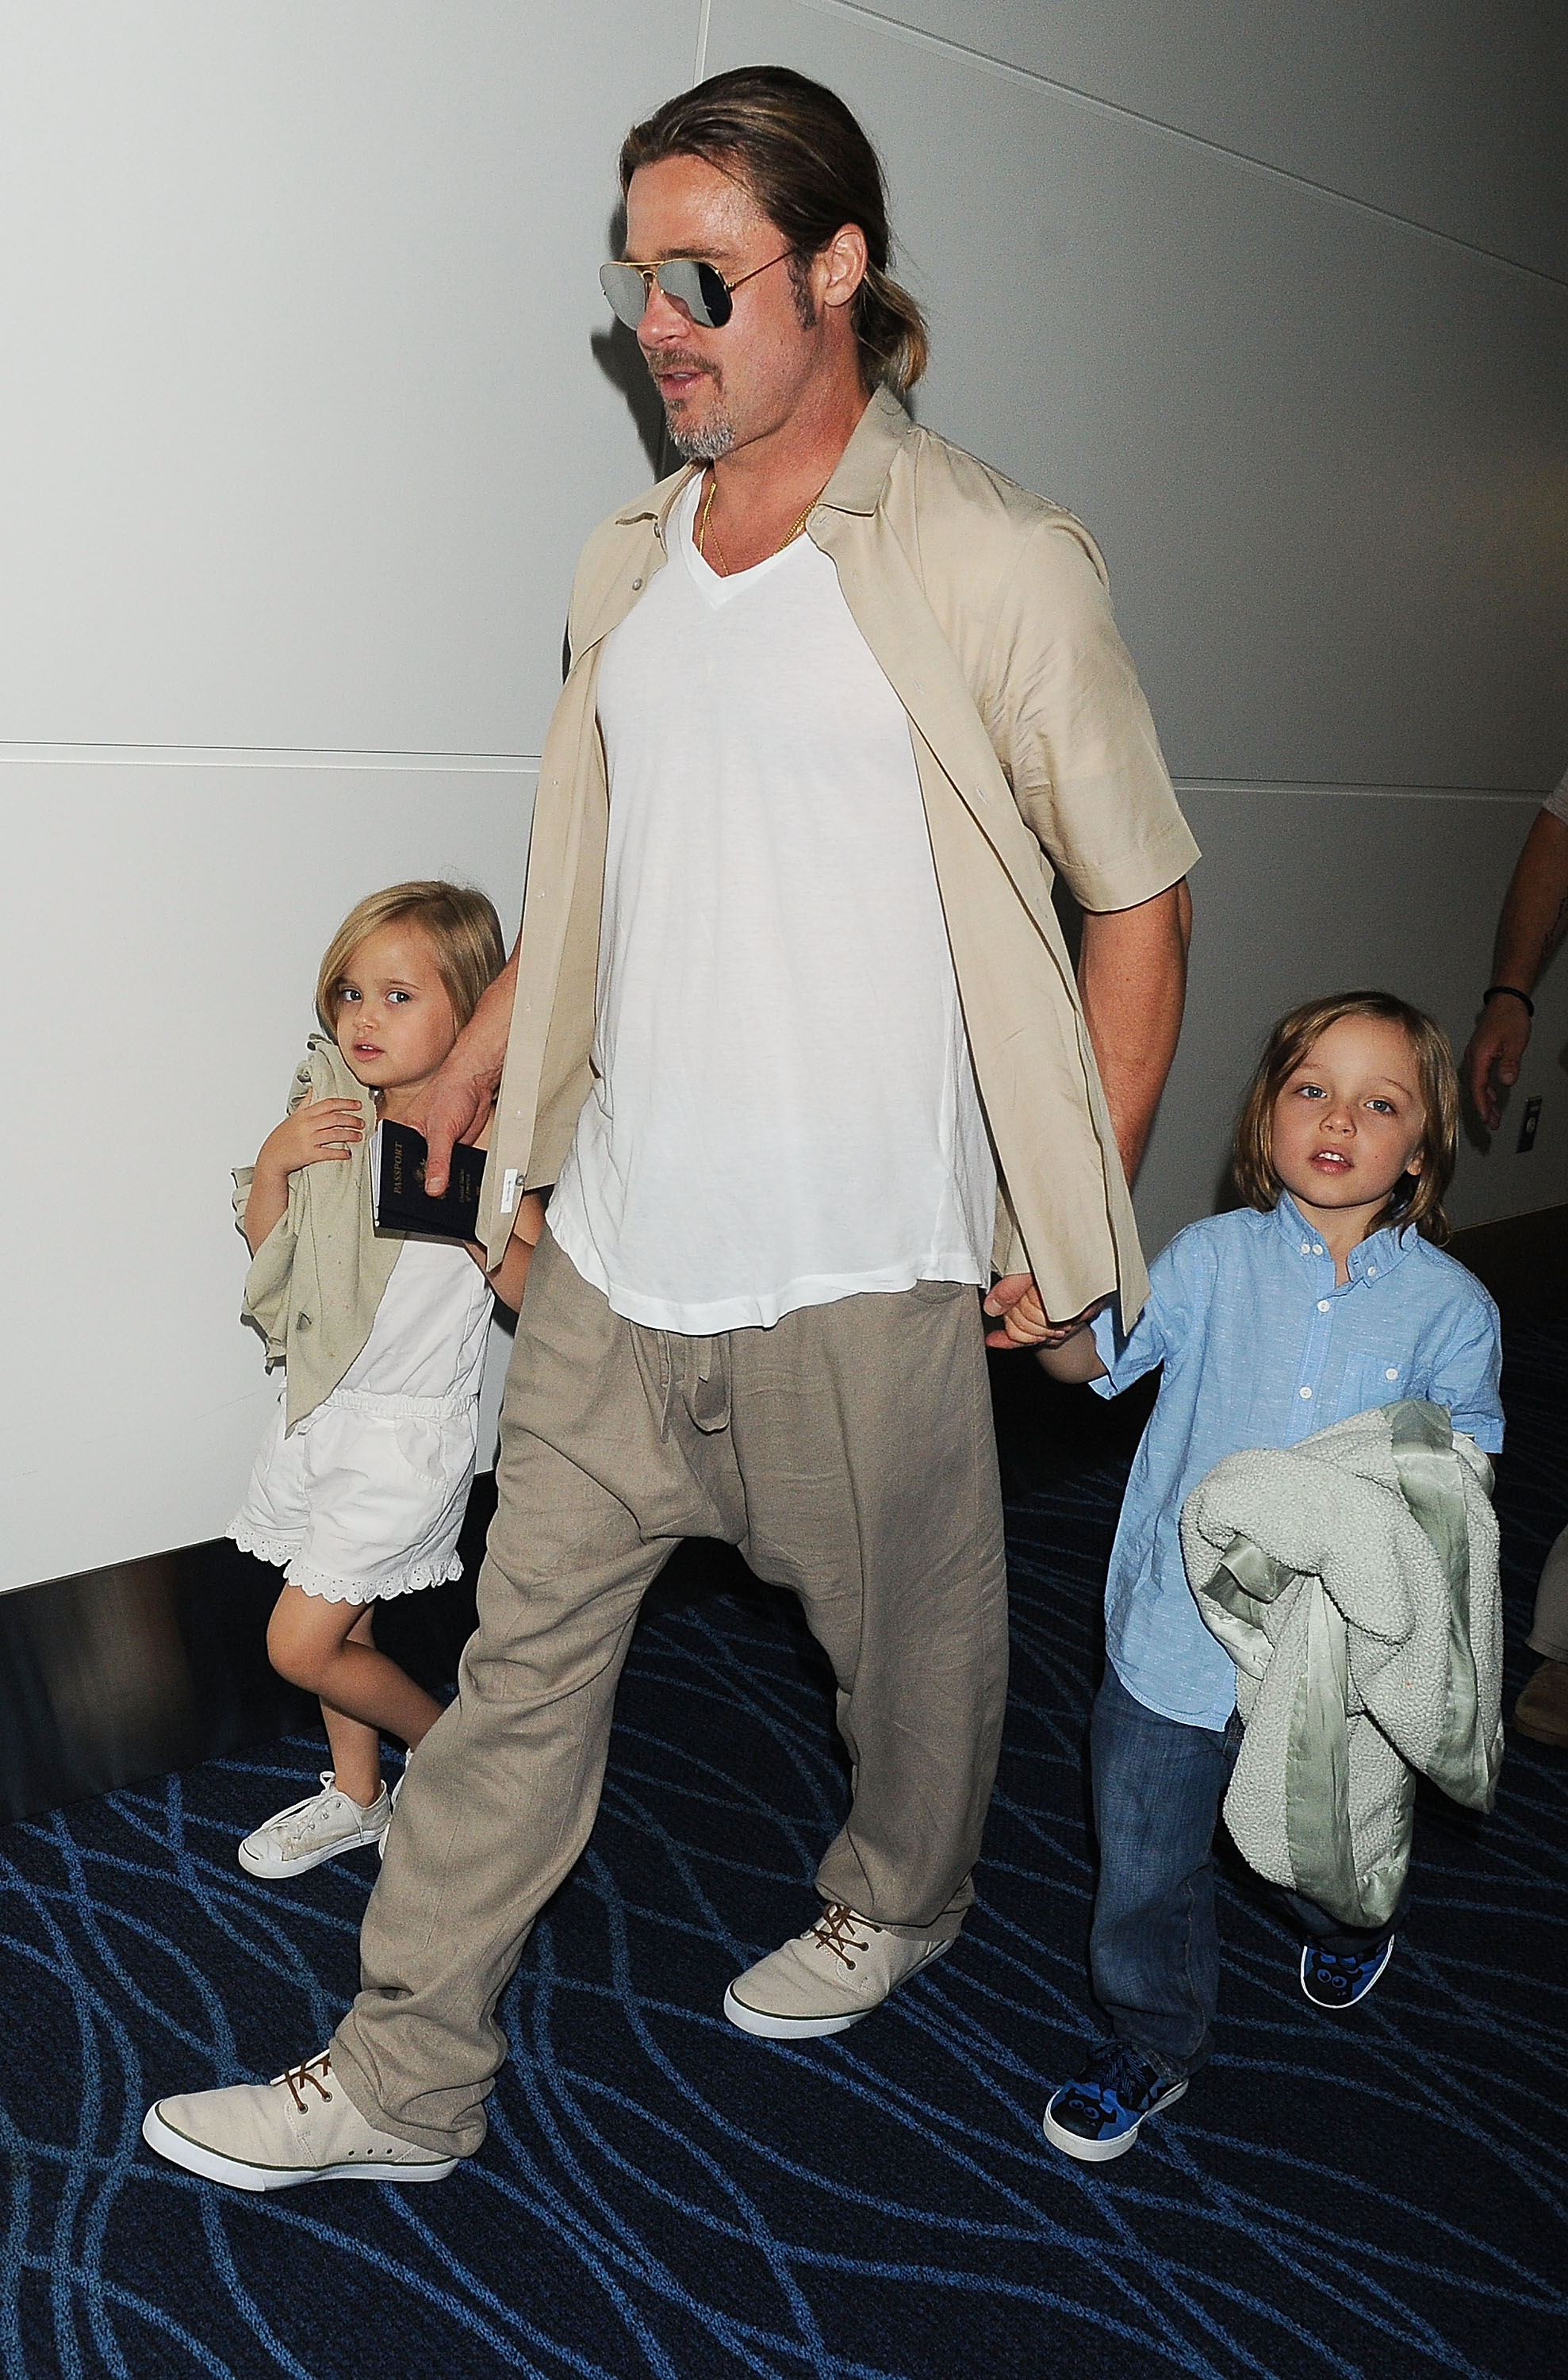 Vivienne Jolie-Pitt, Brad Pitt, and Knox Jolie-Pitt and spotted on July 30, 2013 in Tokyo, Japan. | Source: Getty Images